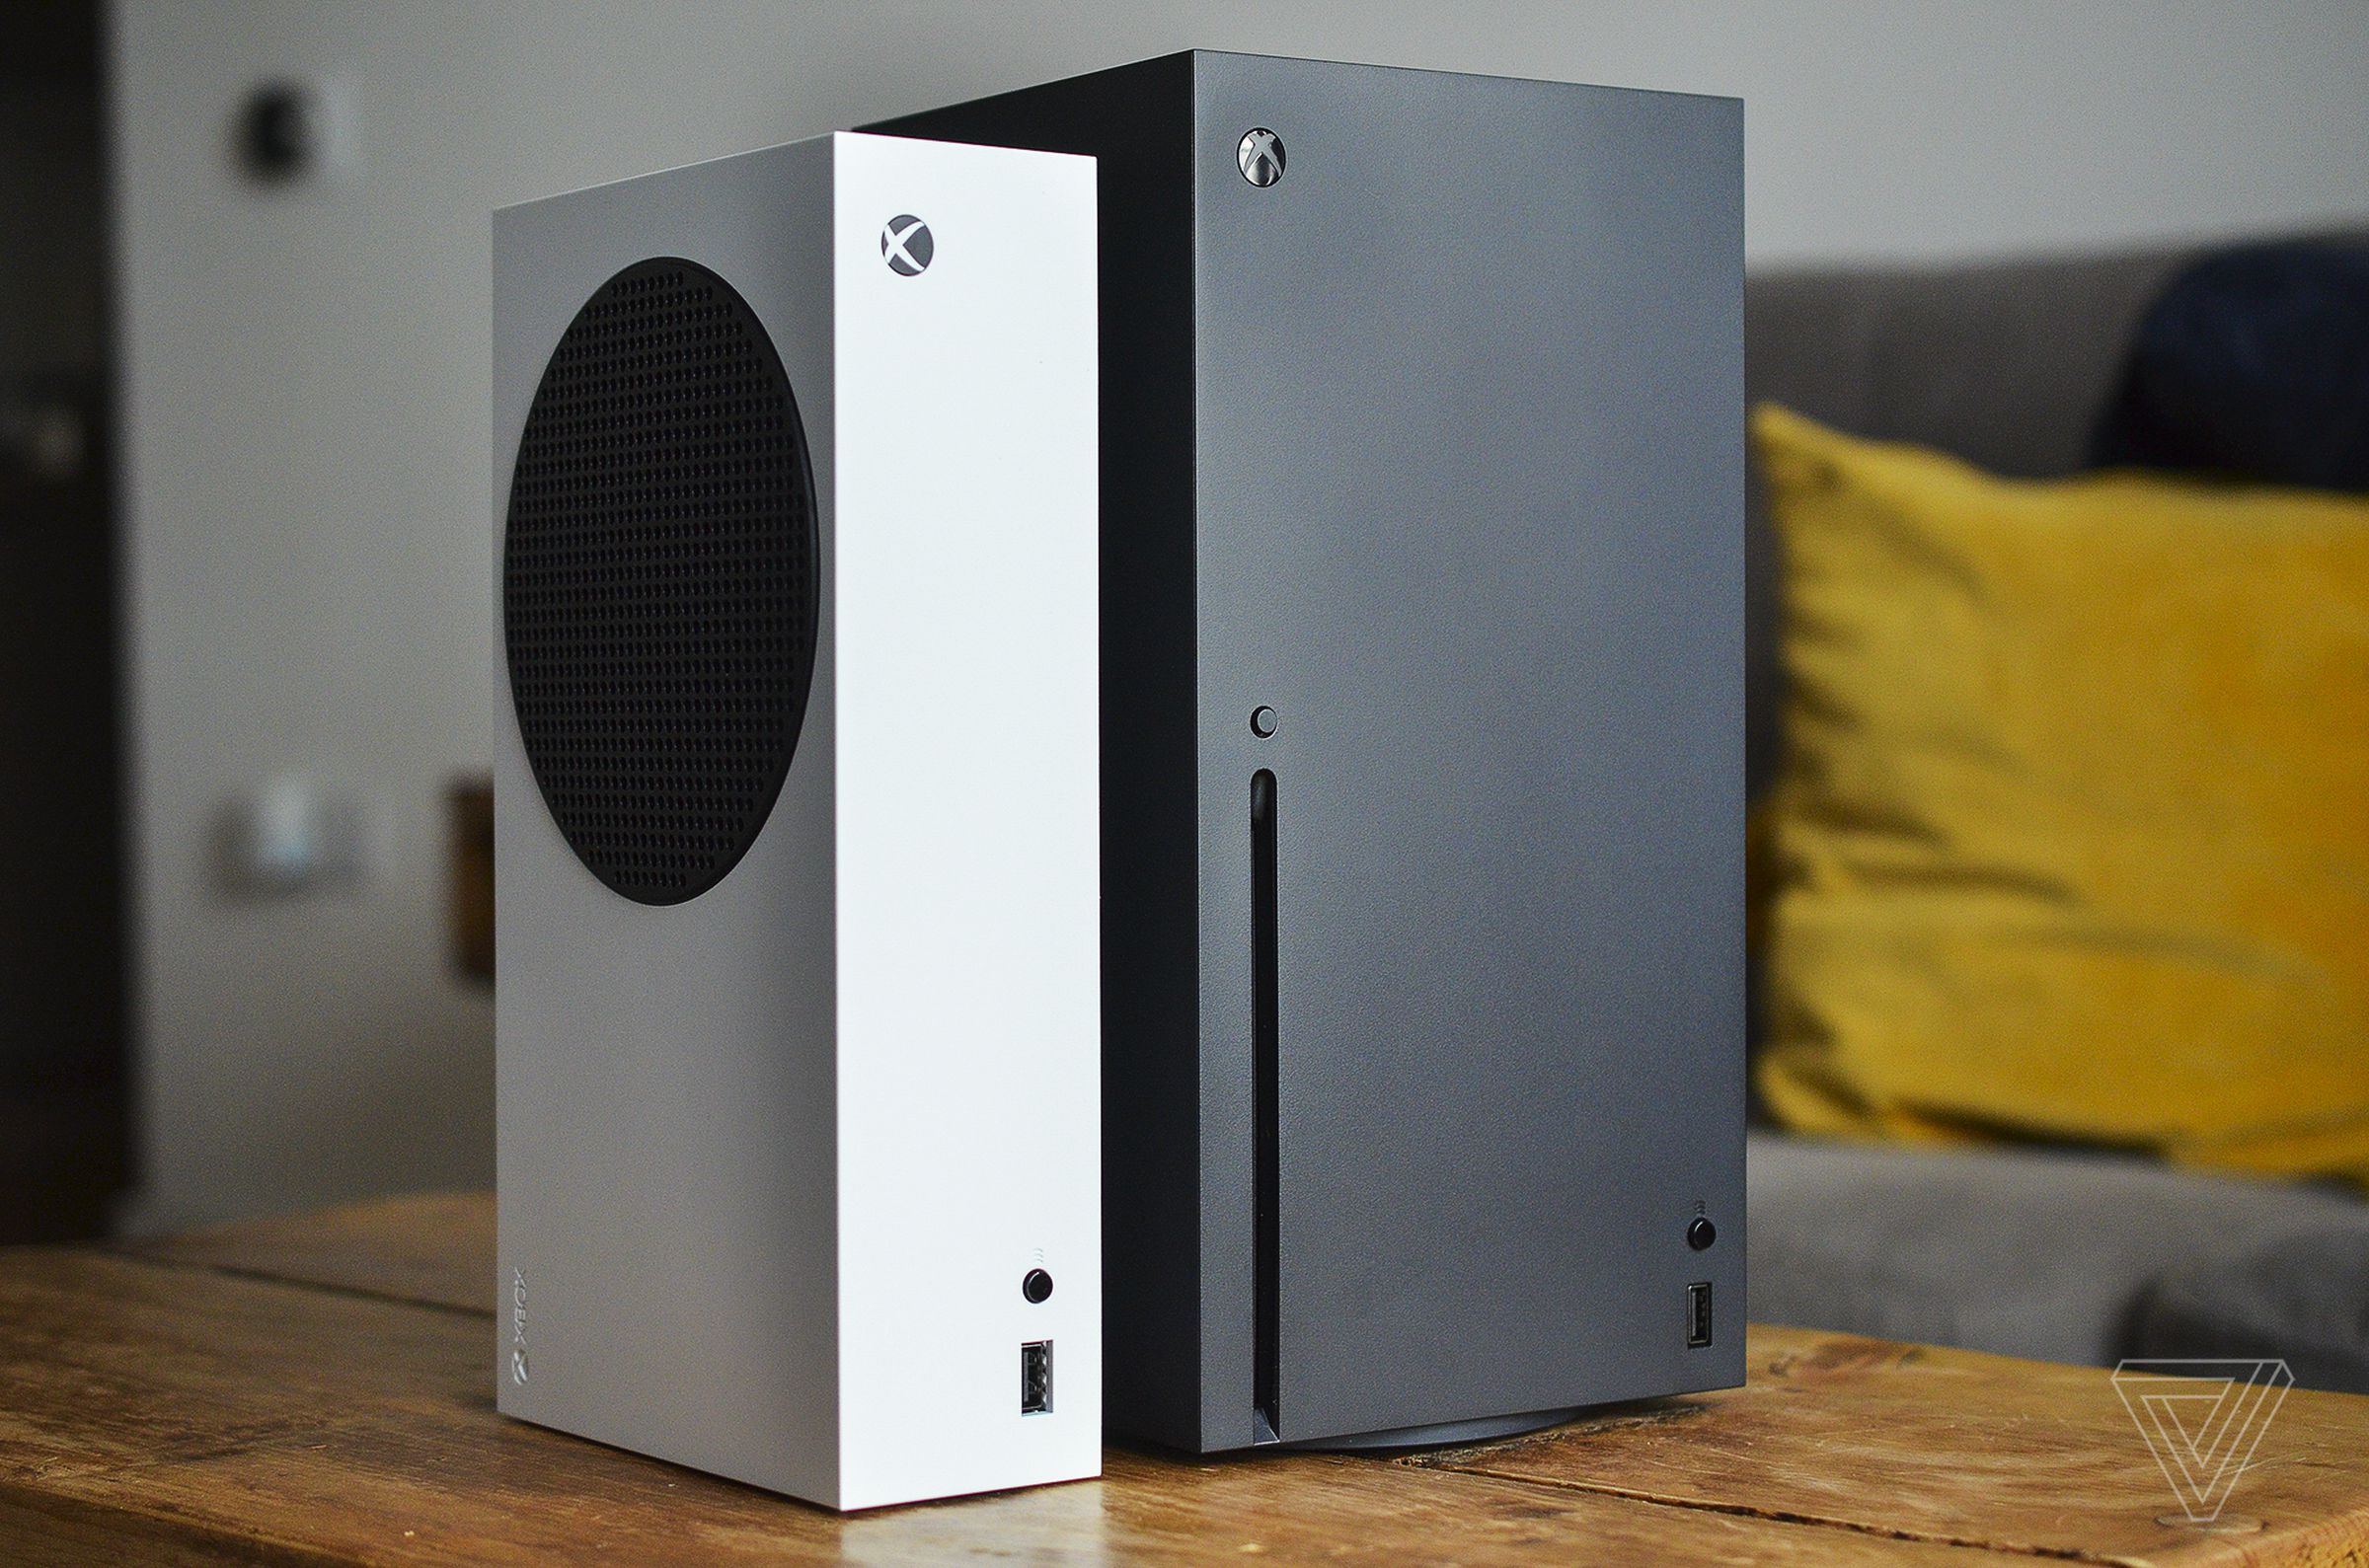 Microsoft's white Xbox Series S sits next to a large black Xbox Series X on a wooden coffee table in the living room